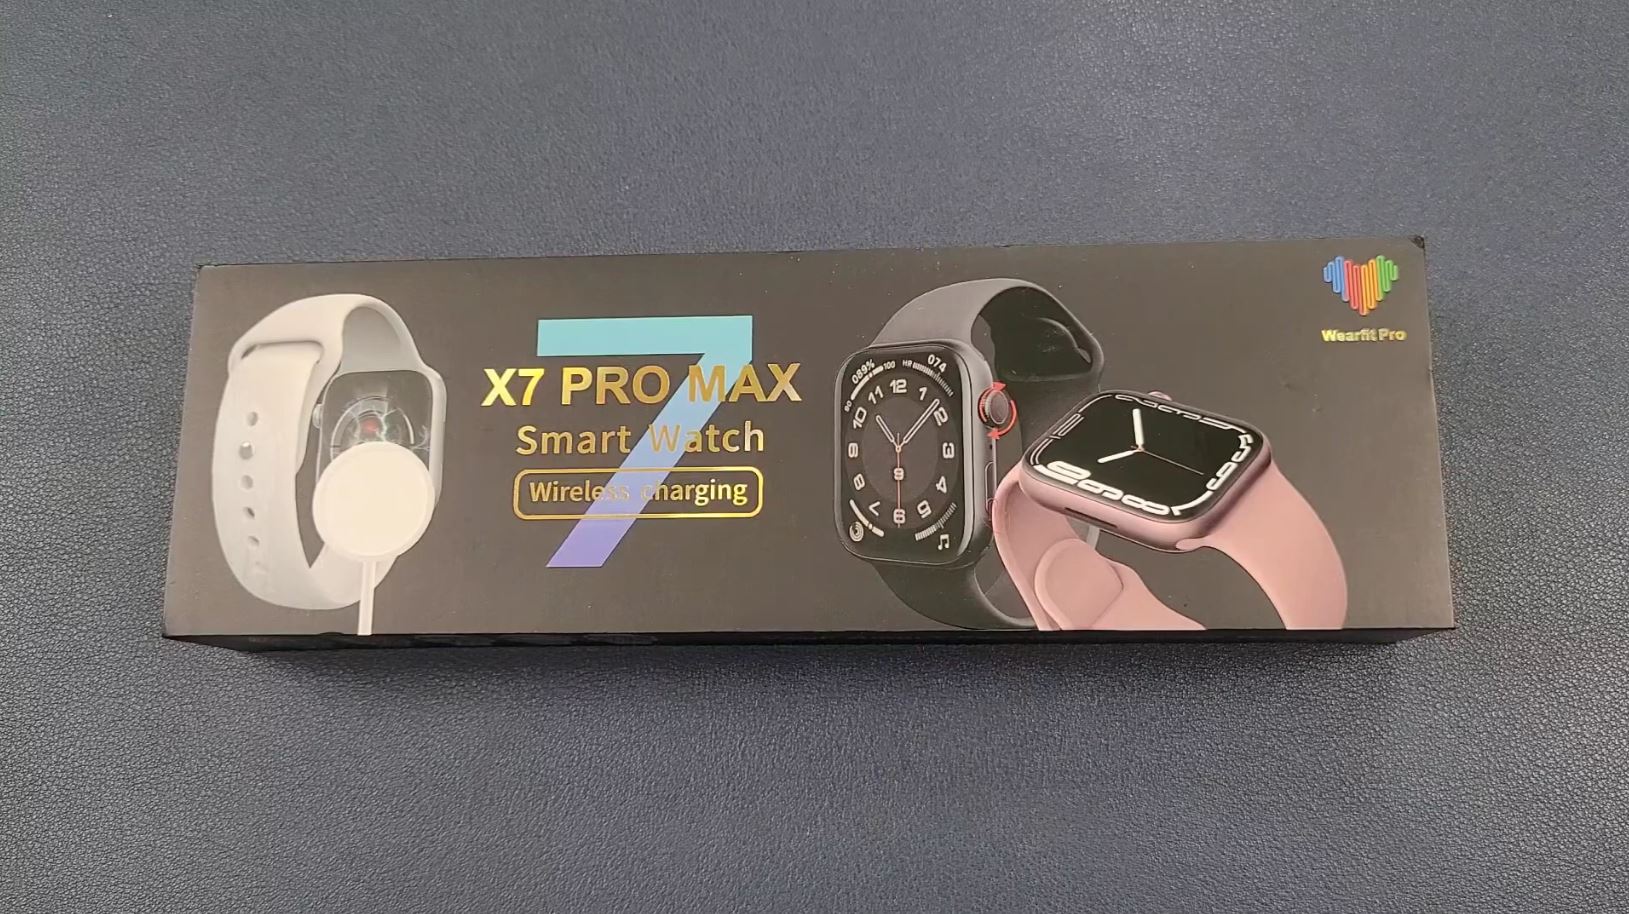 x7-pro-max-smartwatch-review